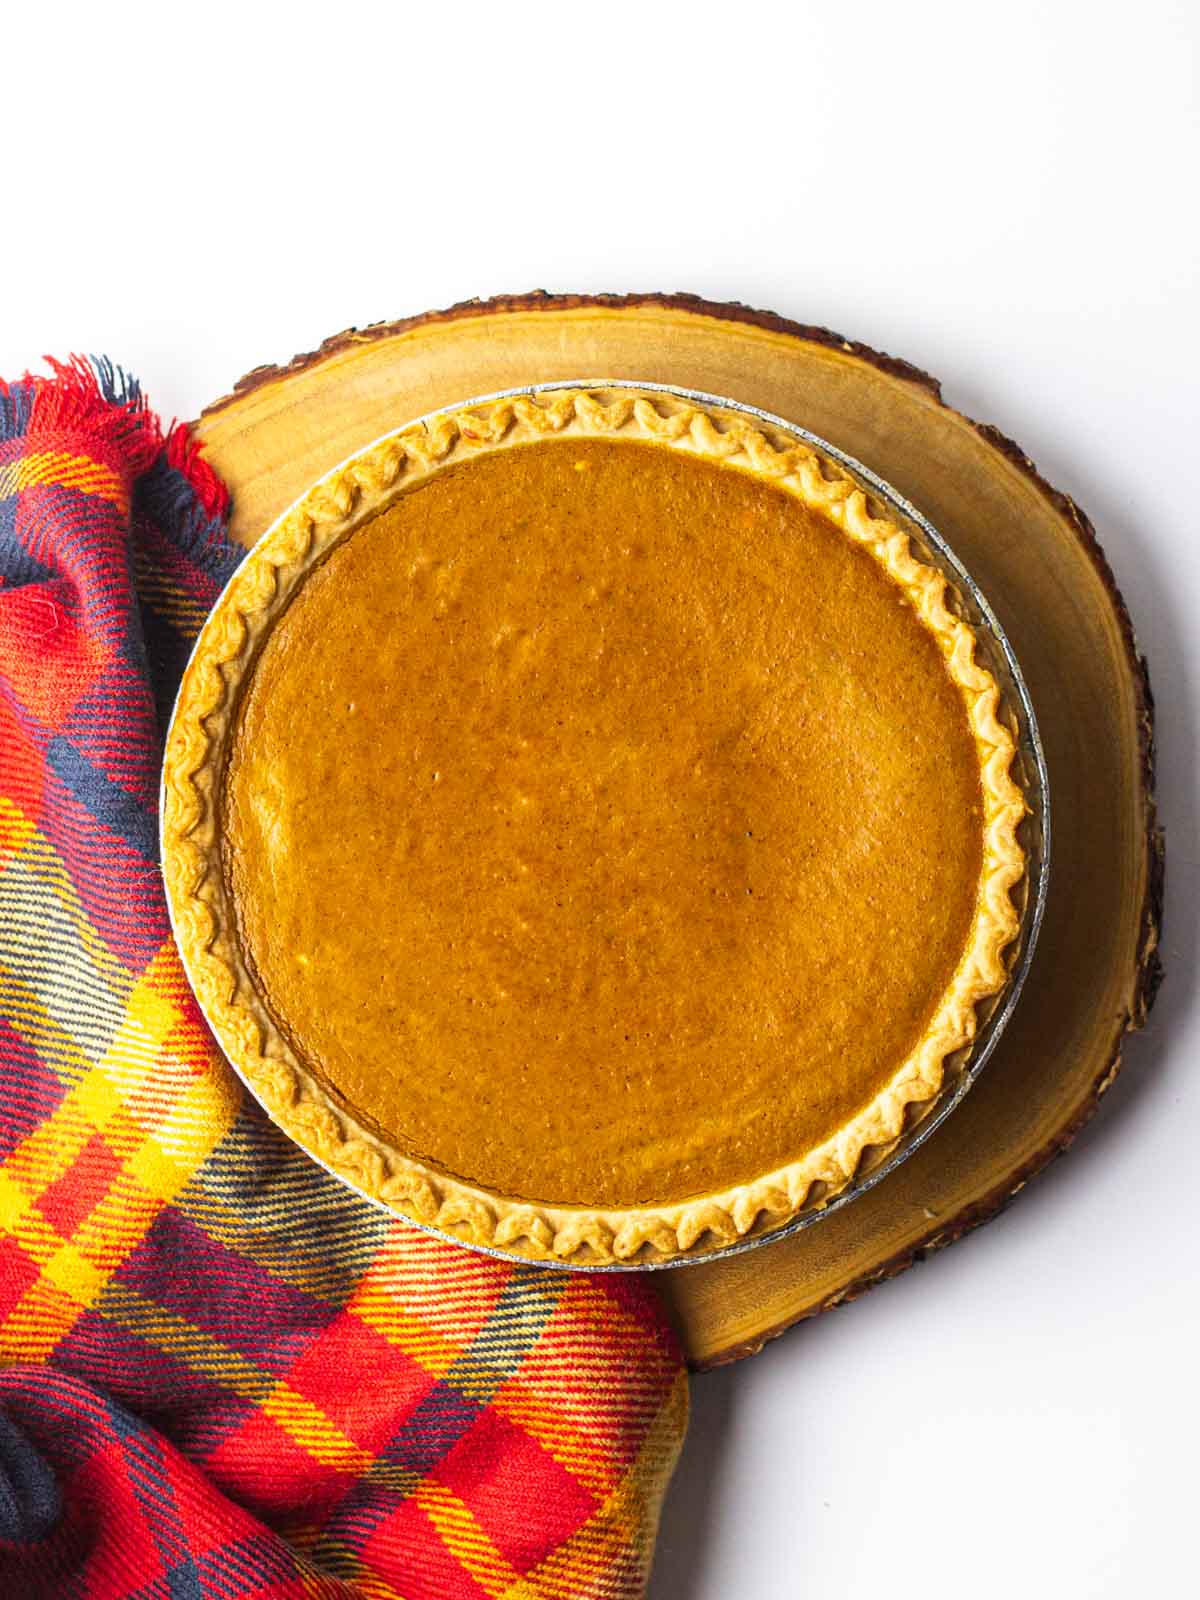 A whole fireball pumpkin pie on a round wooden plank with a red plaid cloth along the left side of the pie.